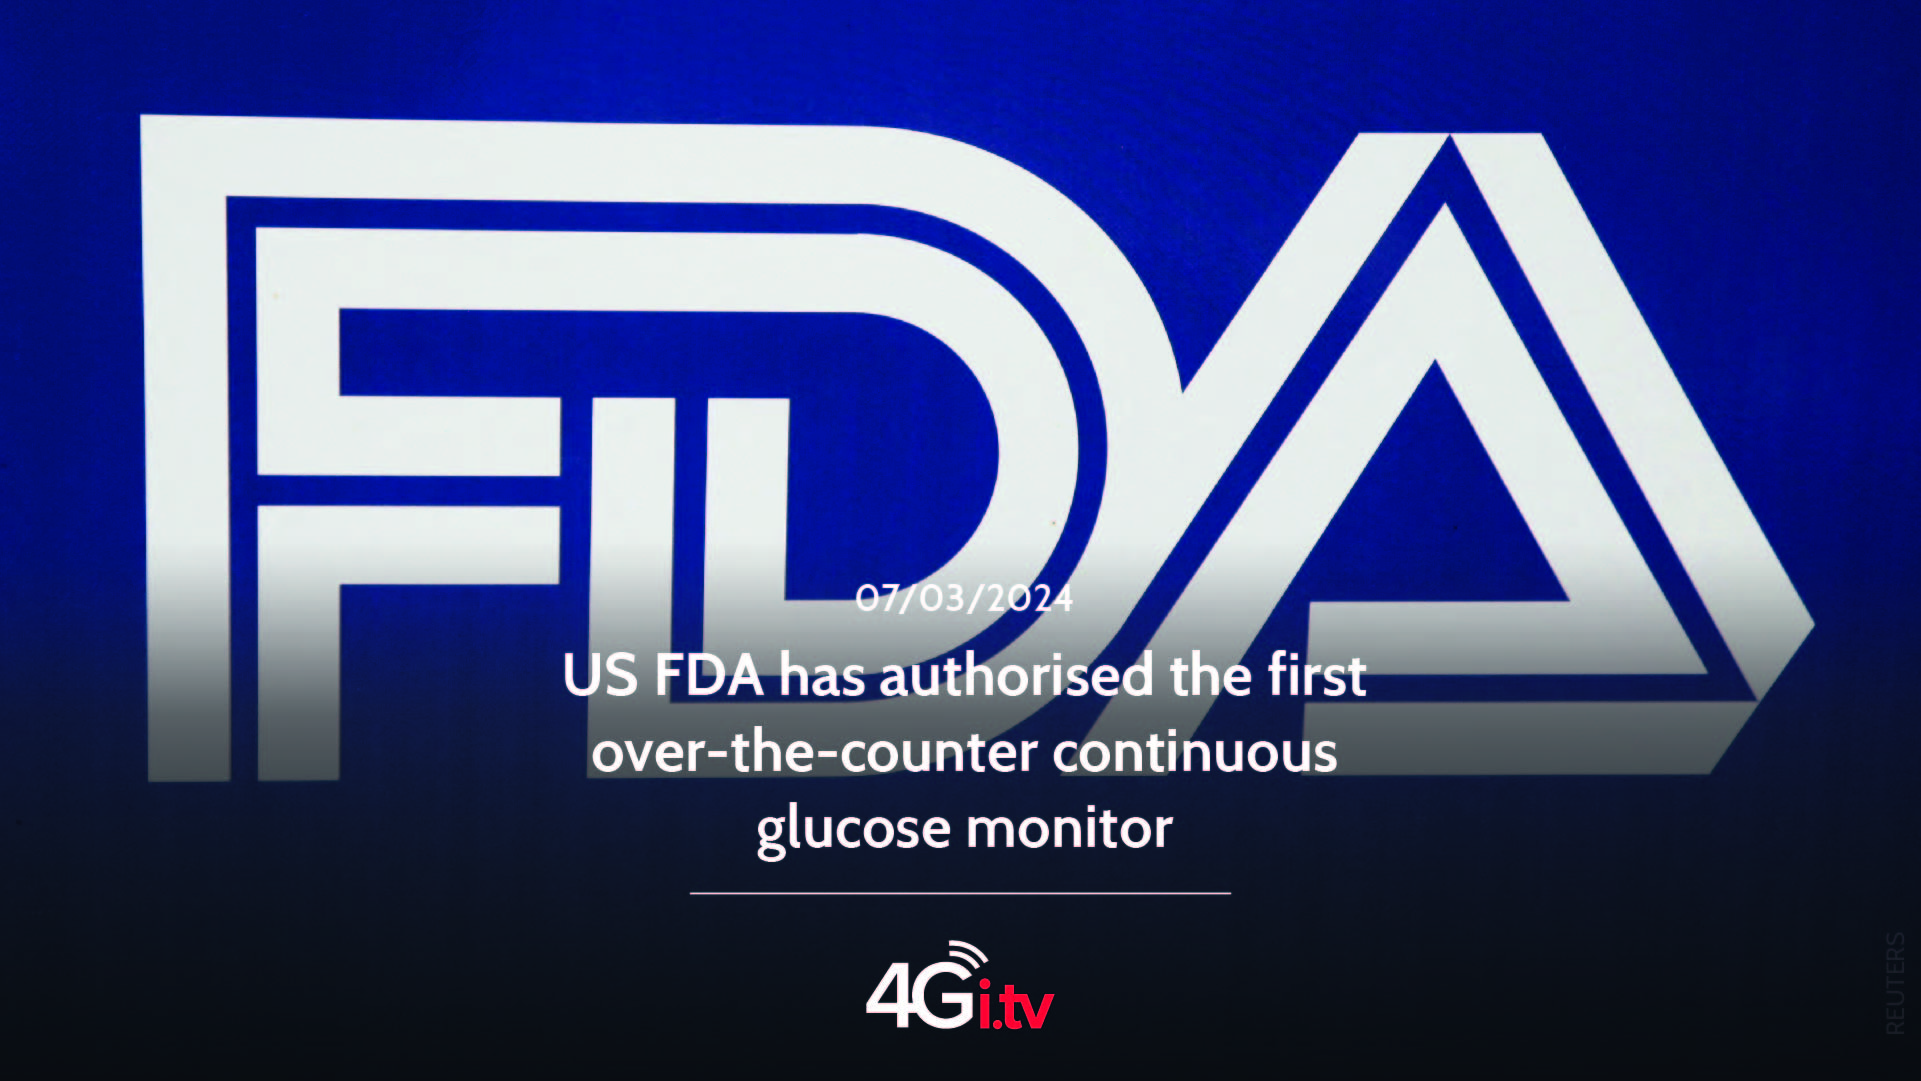 Подробнее о статье US FDA has authorised the first over-the-counter continuous glucose monitor